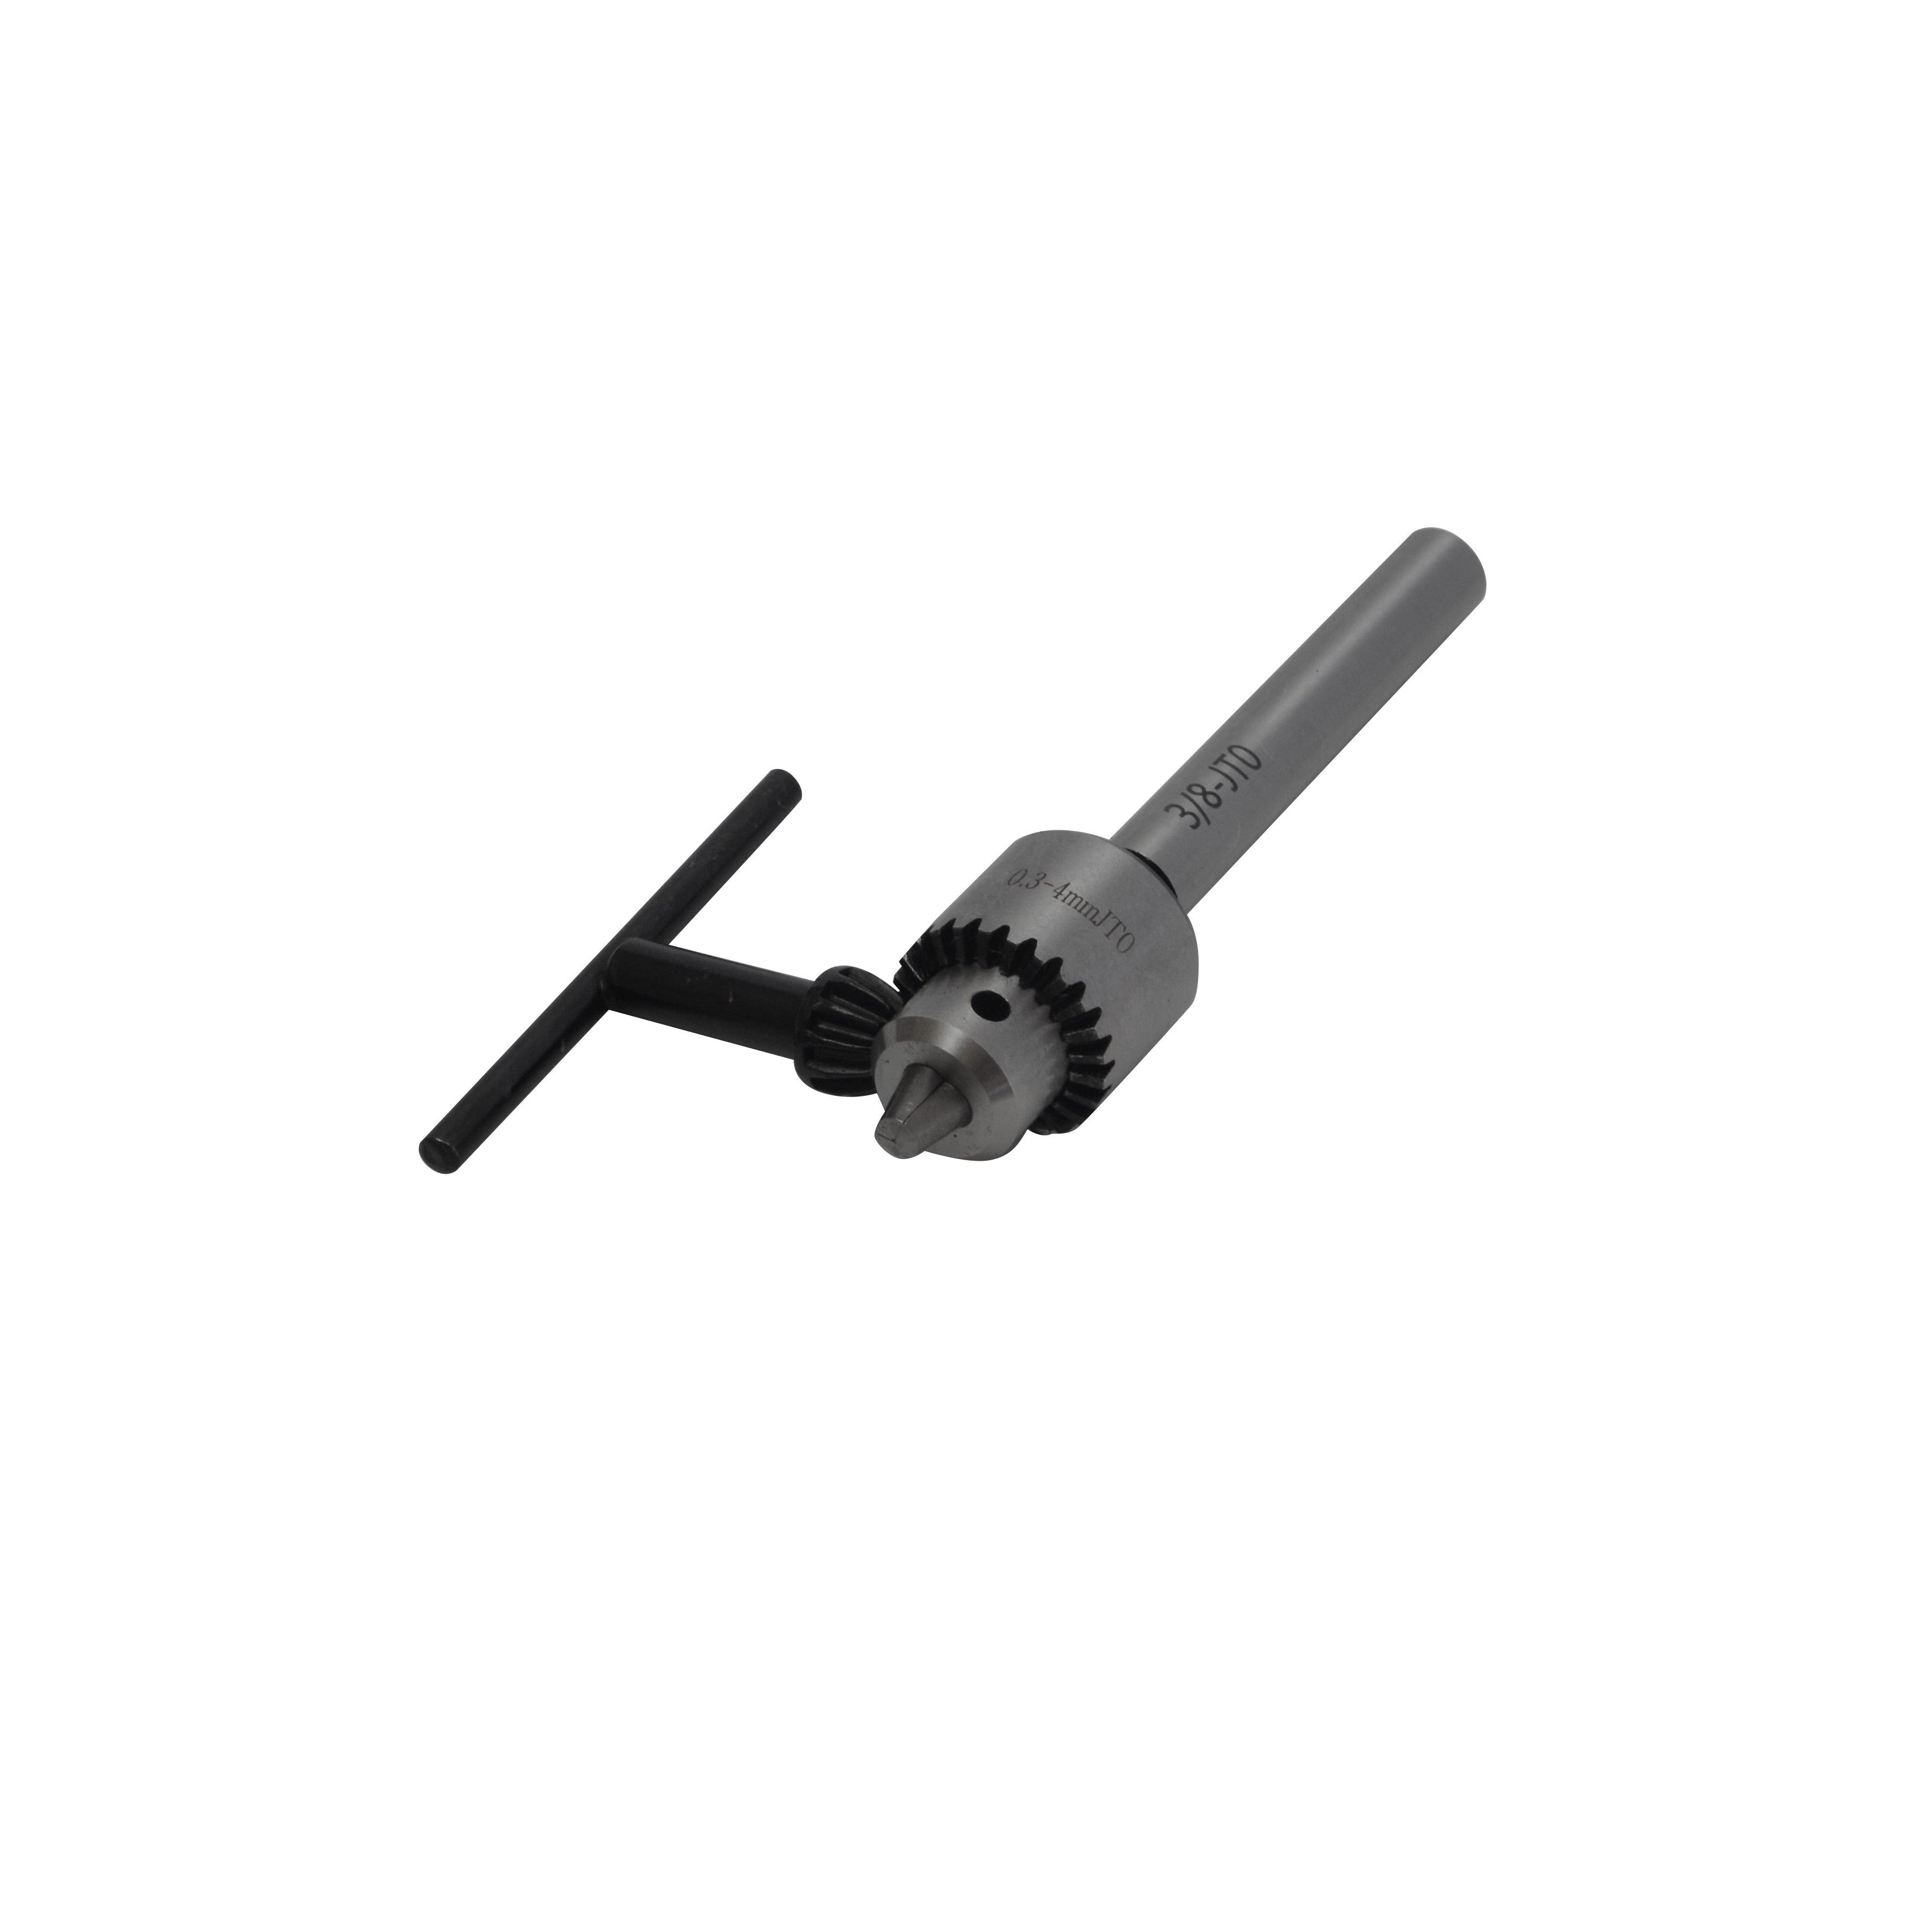 0.3-4mm Key Drill Chuck with JT0 3/8 straight shank arbor supplied, all steel